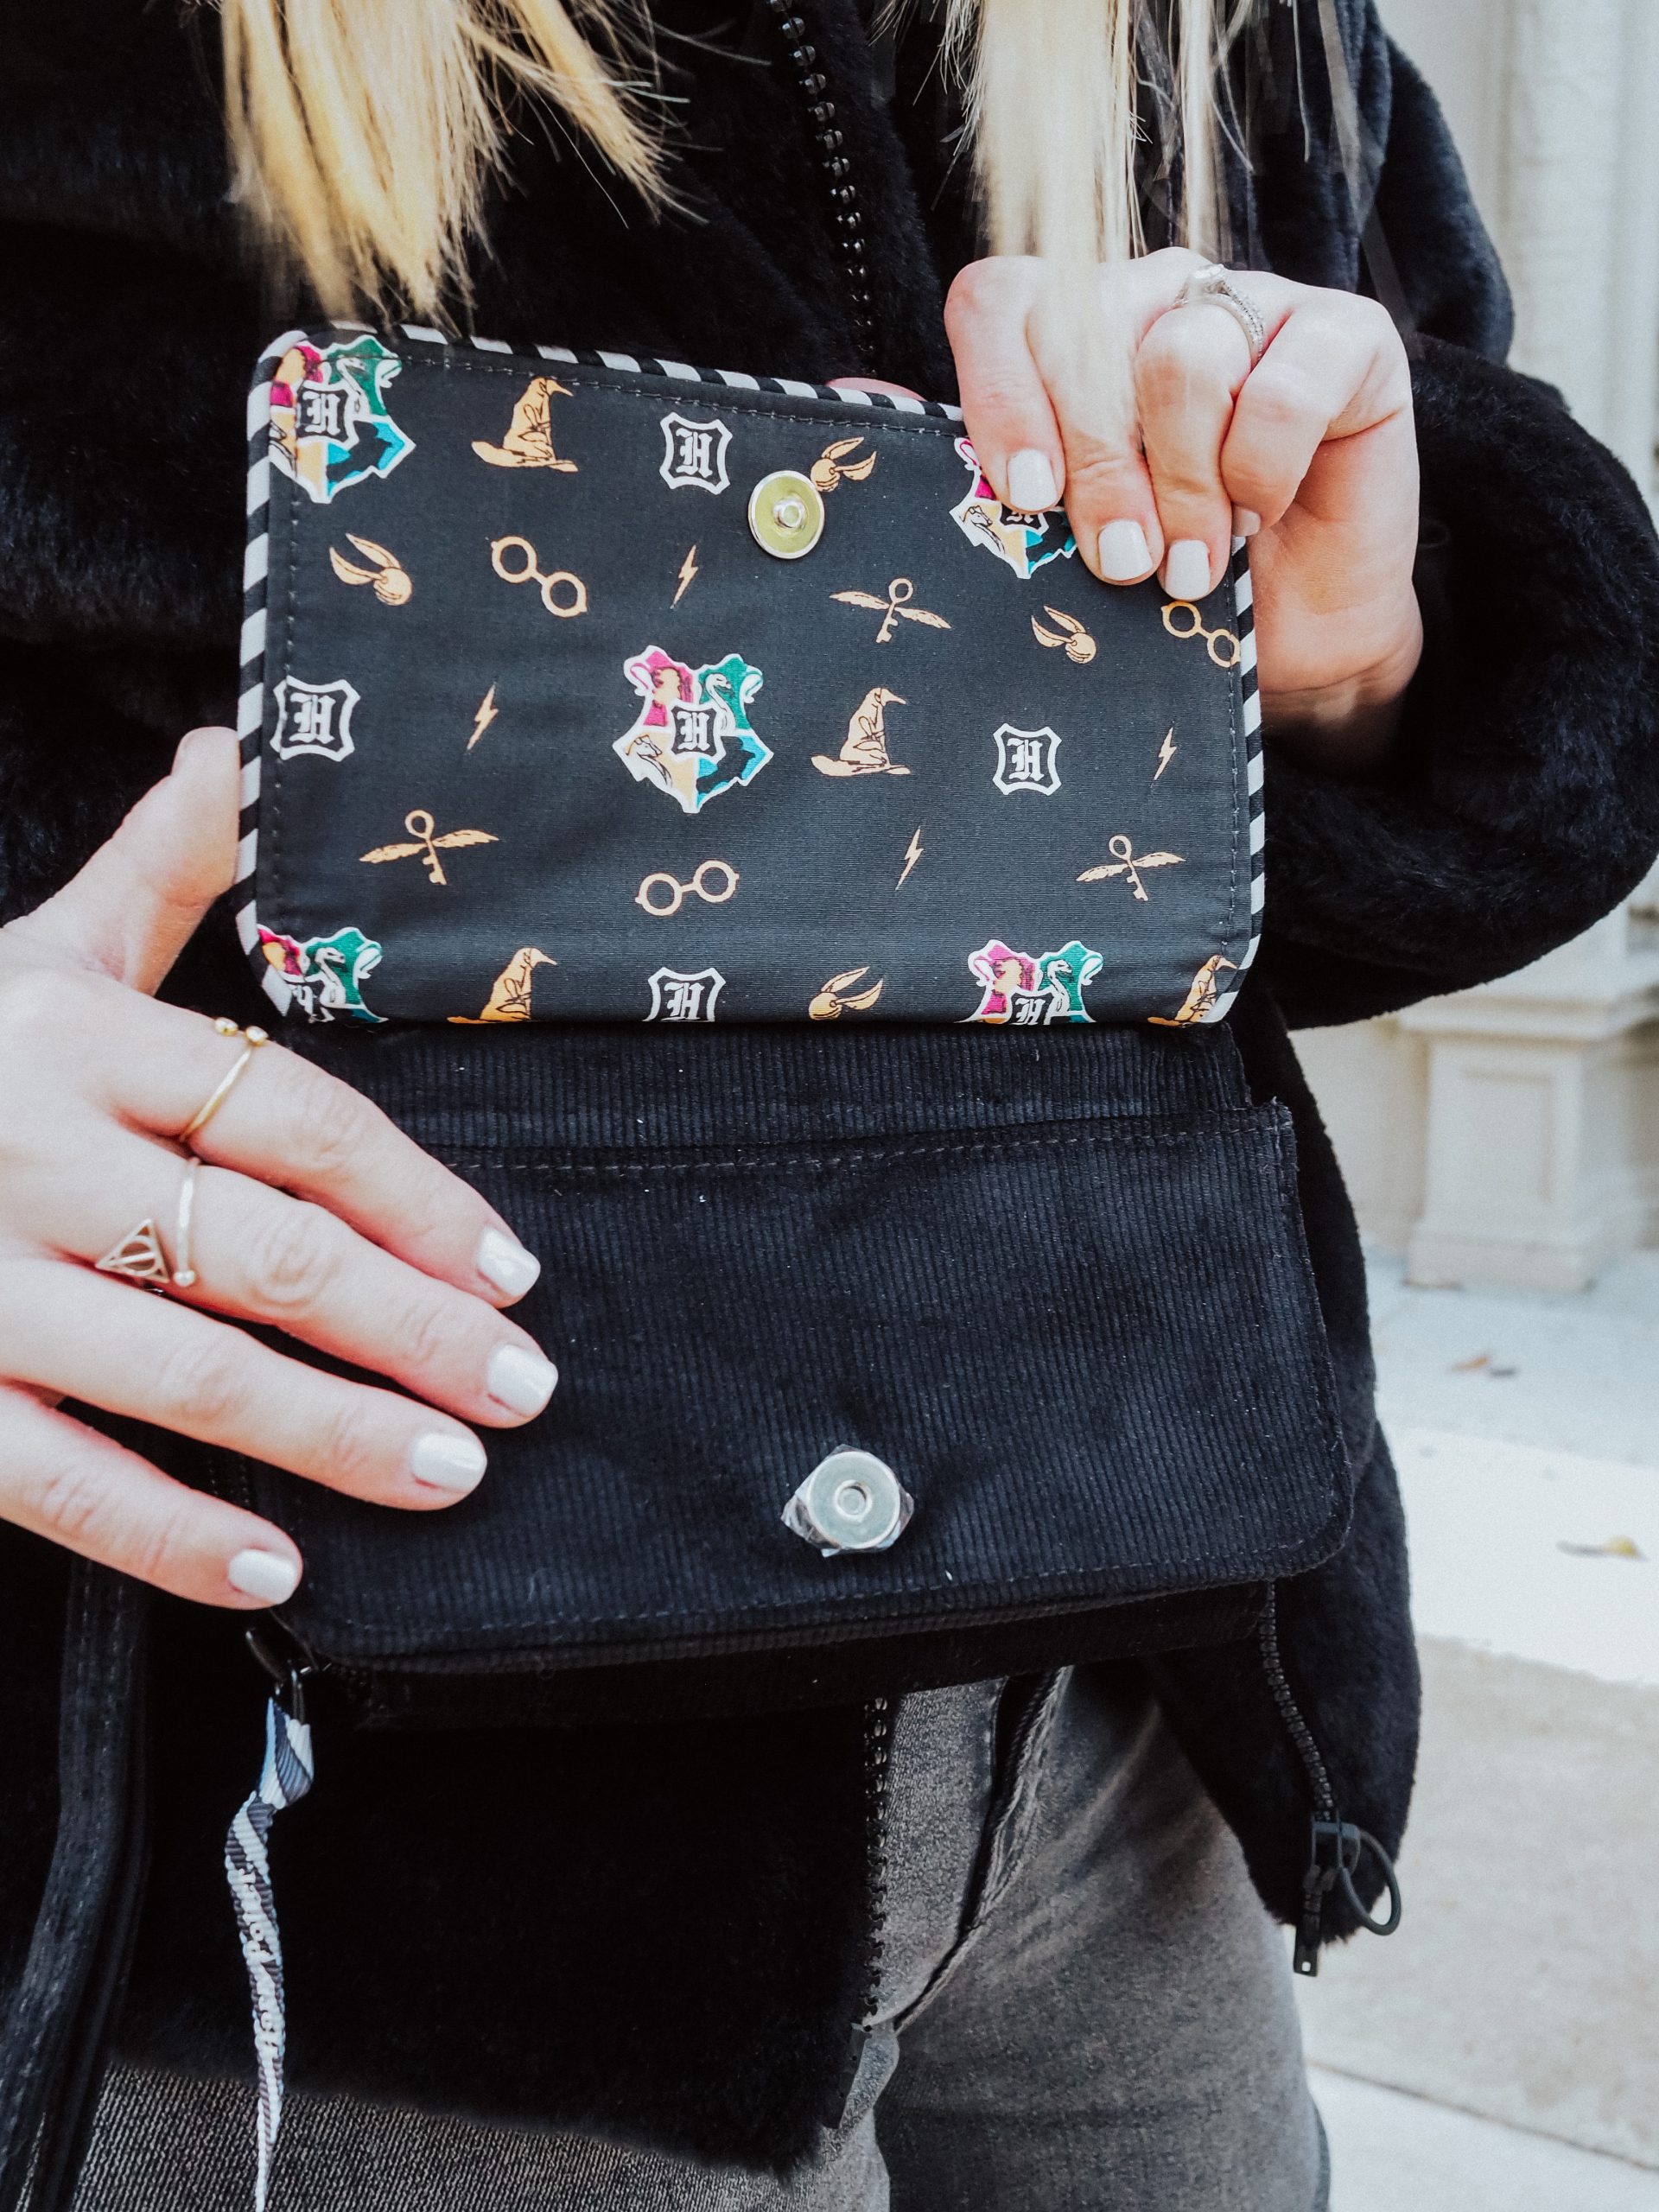 Check out the new Vera Bradley Harry Potter collection pros, cons, and best designs in this thorough Vera Bradley Harry Potter review!